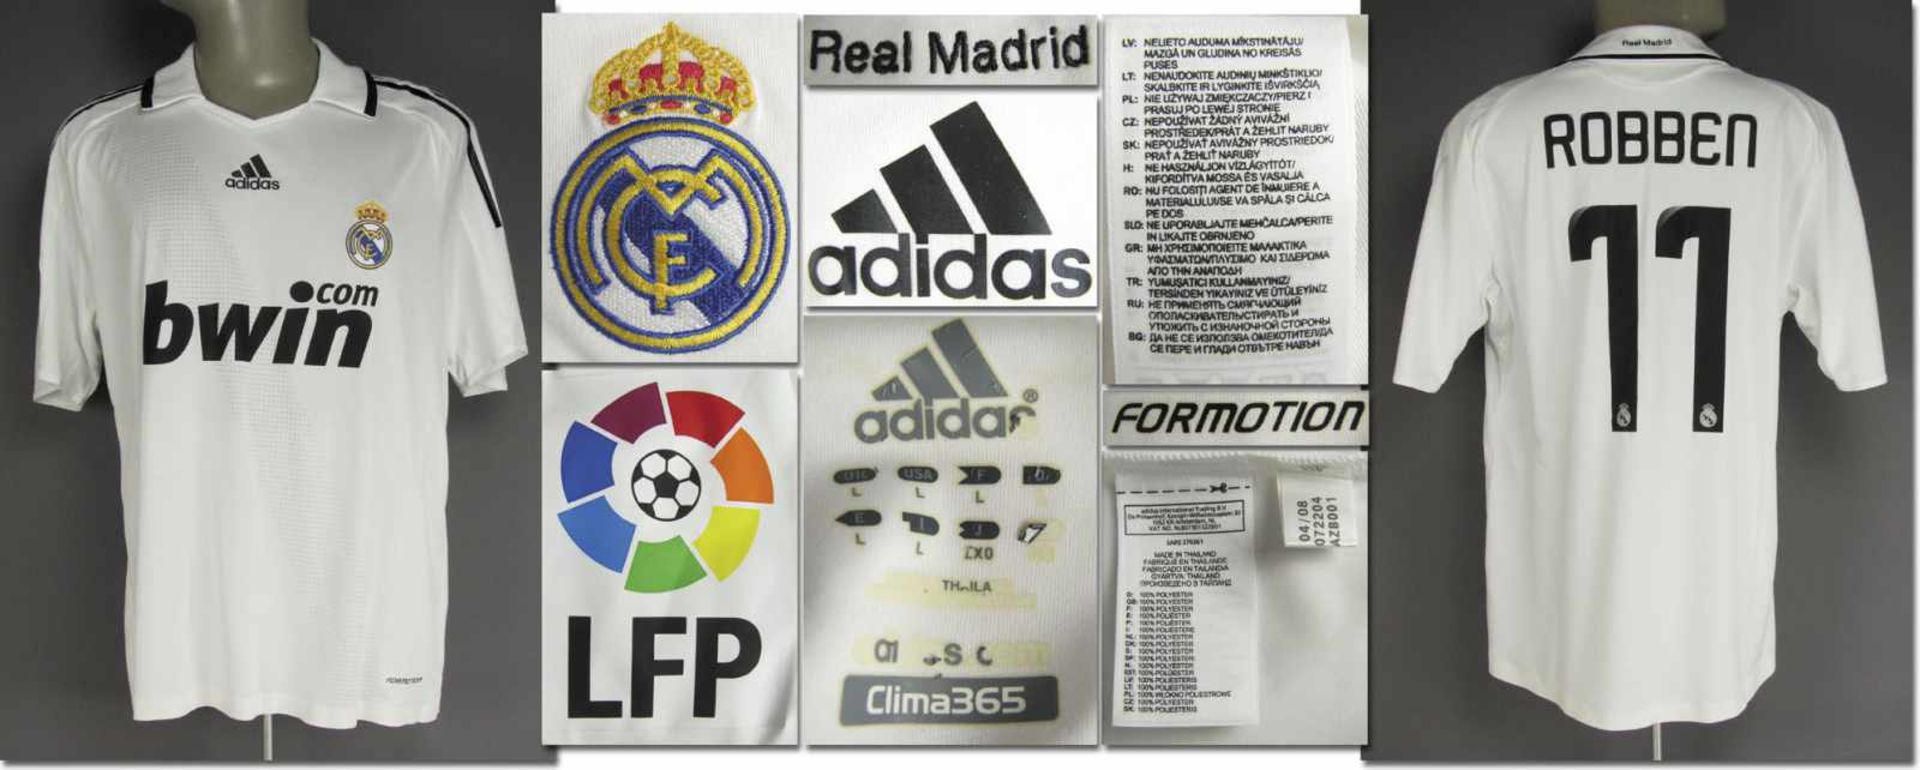 match worn/issued football shirt Real Madrid 2008 - Original match worn shirt Real Madrid with